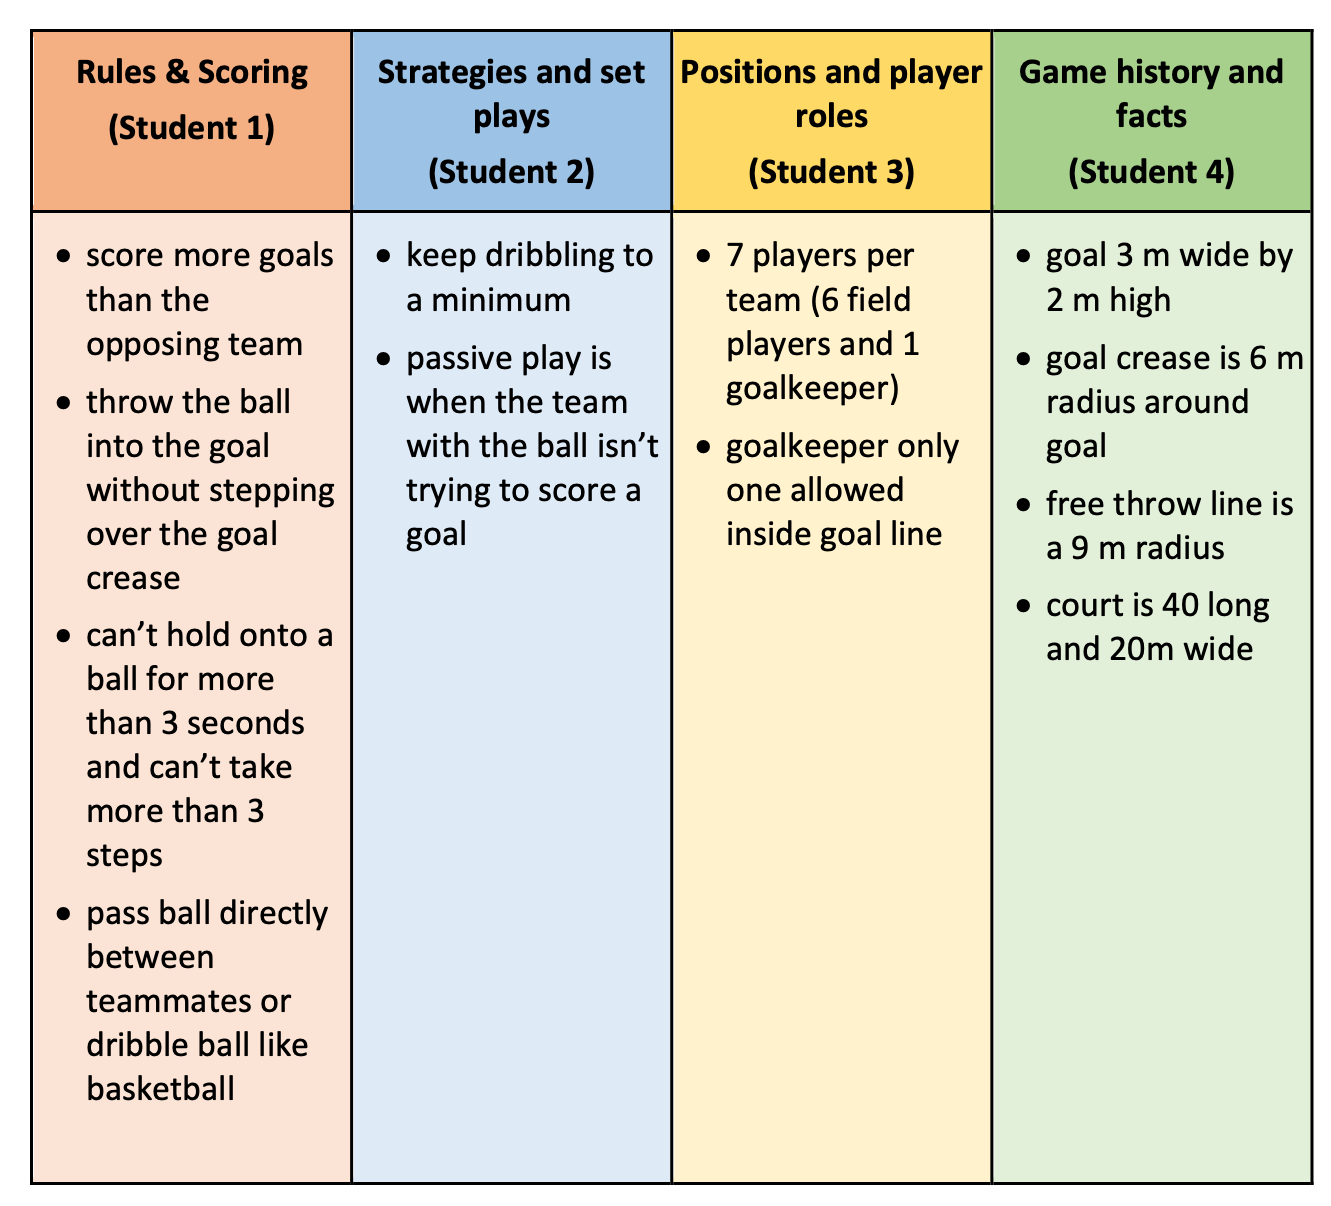 a jigsaw activity completed by four students on European handball. The first student investigated rules and scoring. The second student looked at strategies and set plays. The third student researched positions and player roles, while the last student looked up game history and facts. Each student has written 2 to 4 dot points on their subject.